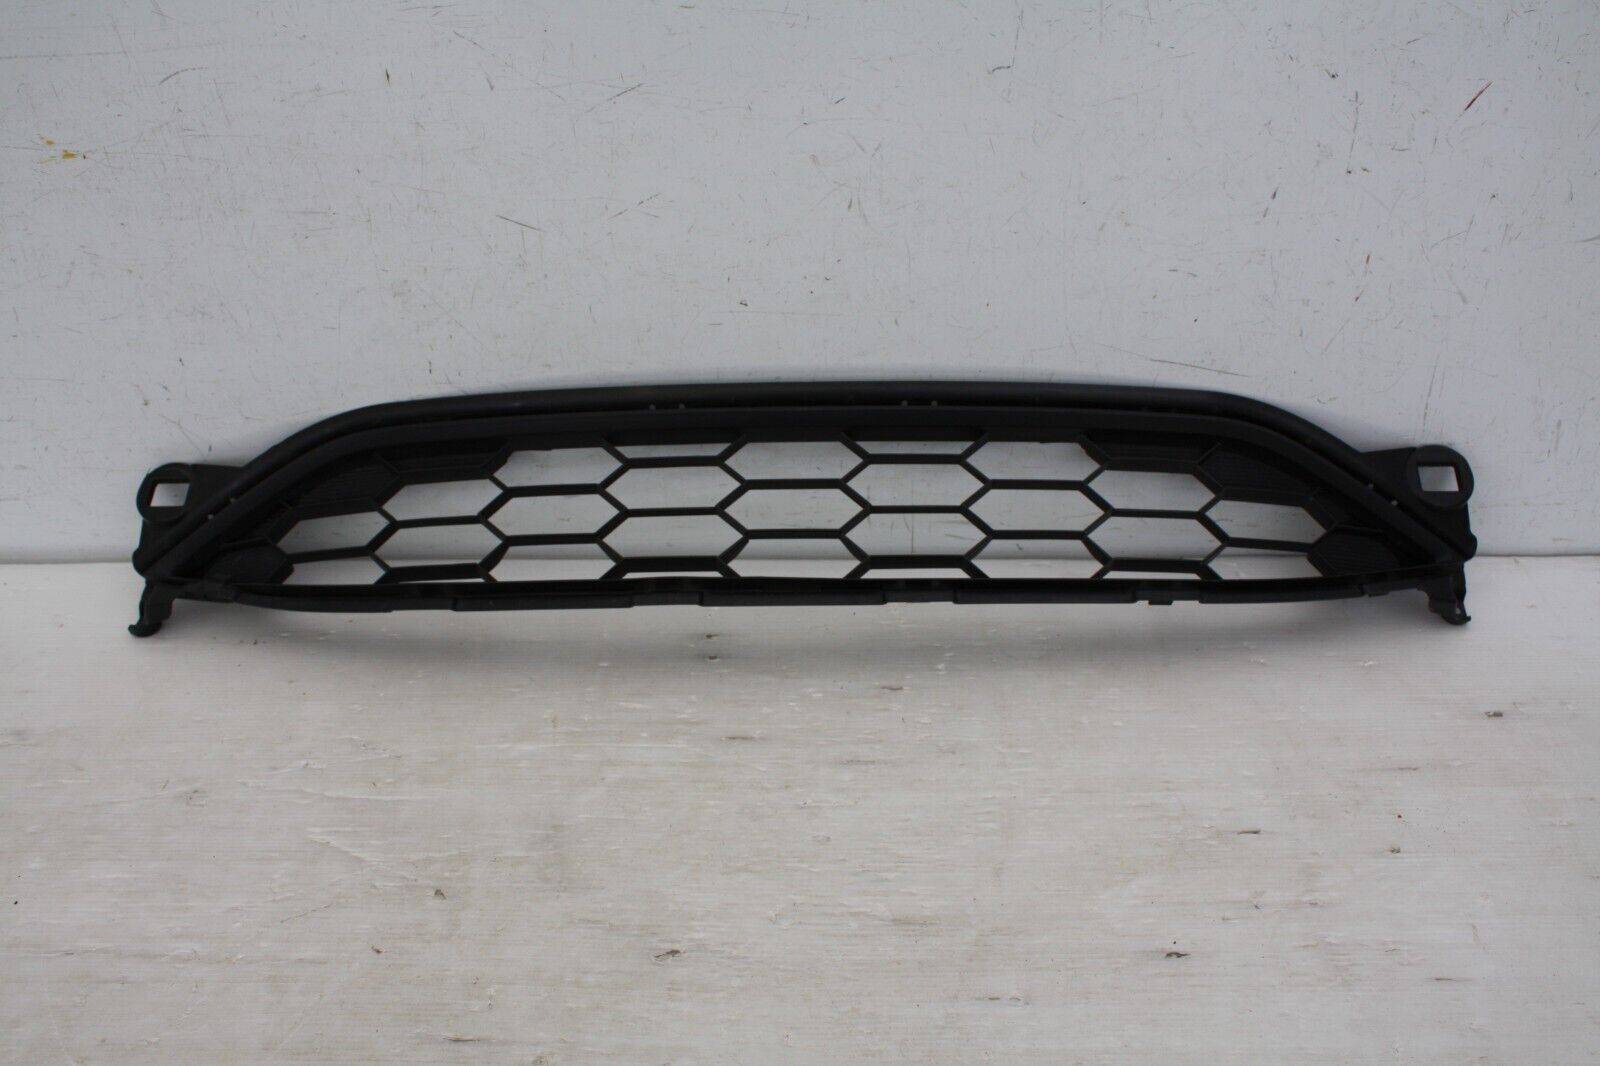 Honda HR V Front Bumper Lower Grill 2015 to 2018 71103T7JH000 Genuine 175714628459